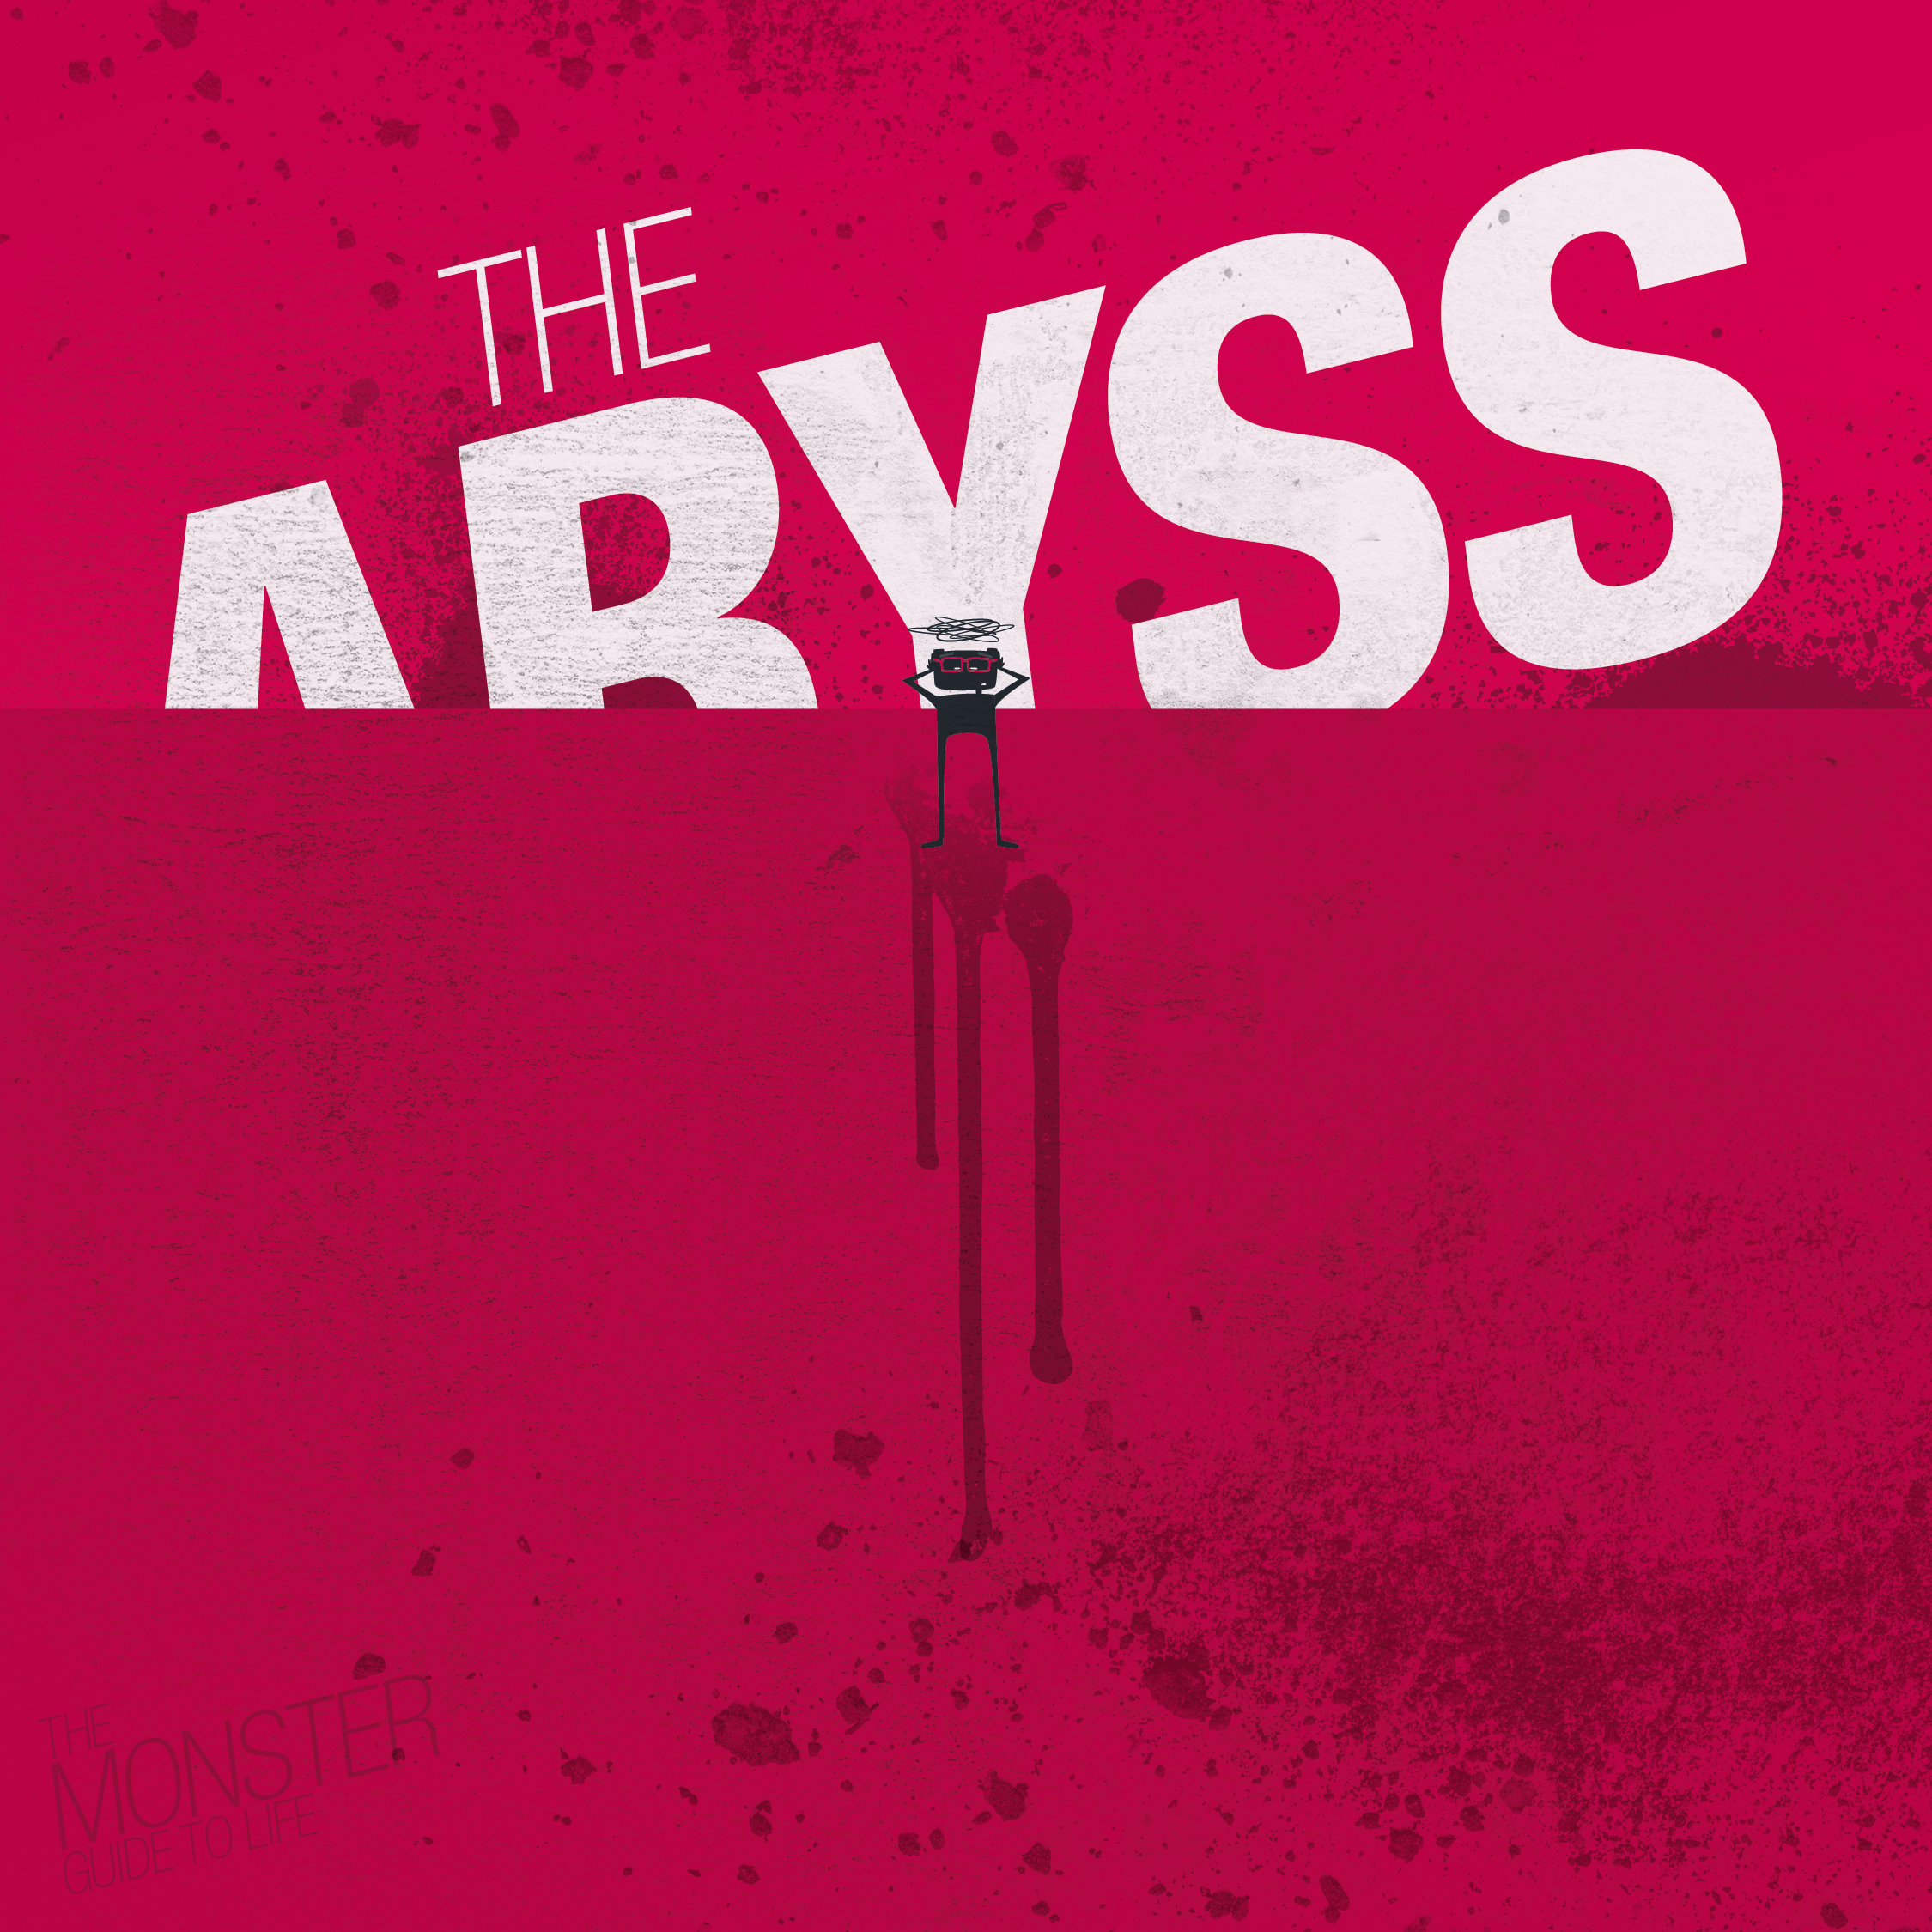 The Abyss illustration